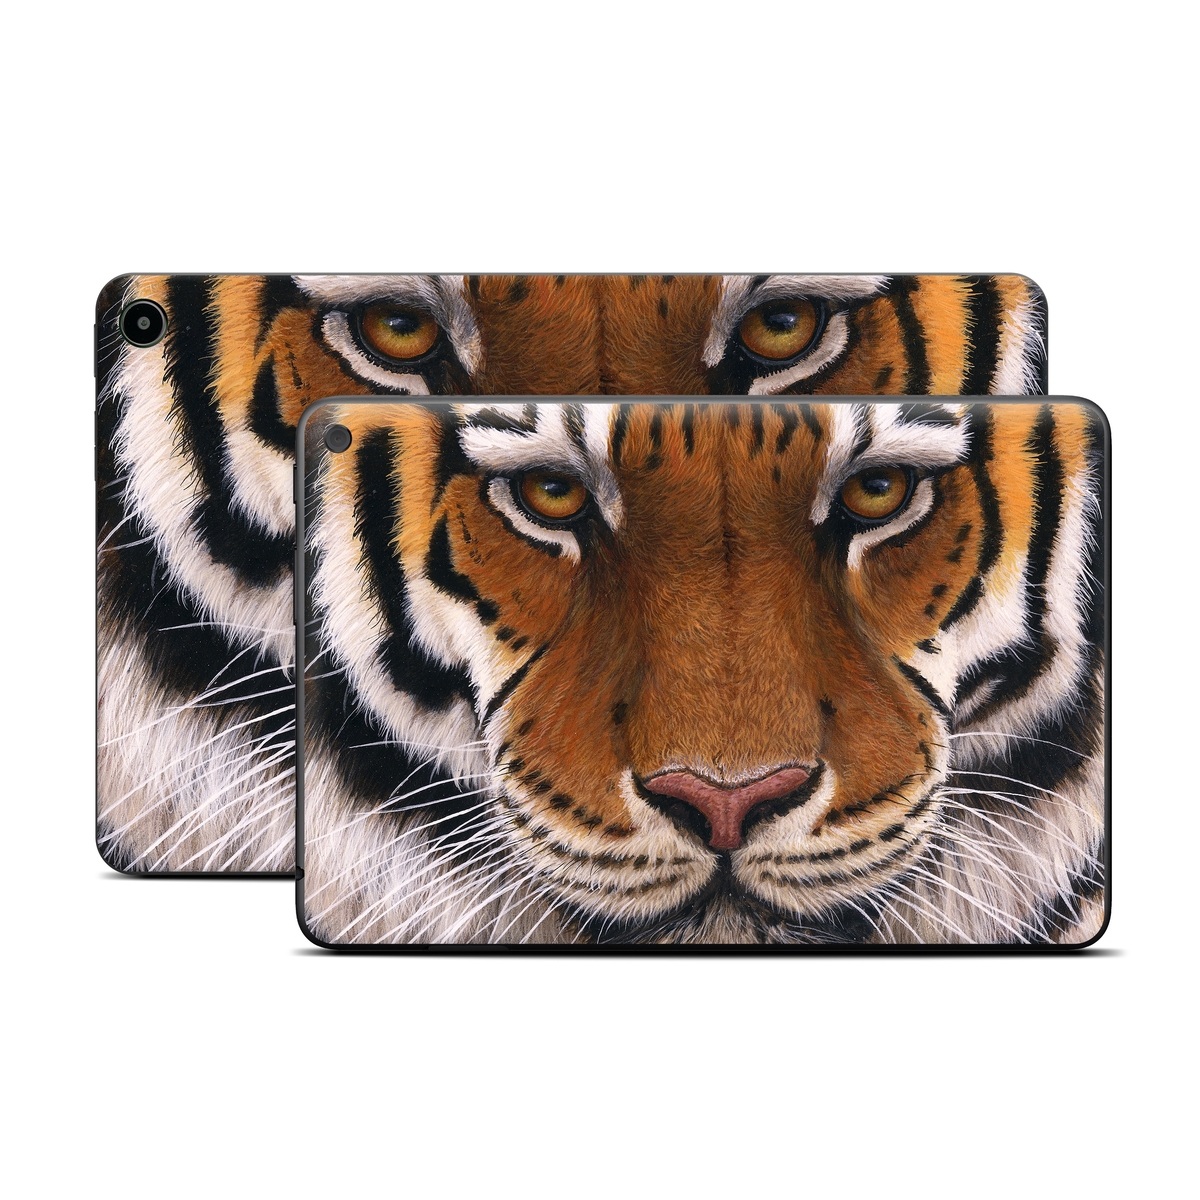 Amazon Fire Tablet Series Skin Skin design of Tiger, Mammal, Wildlife, Terrestrial animal, Vertebrate, Bengal tiger, Whiskers, Siberian tiger, Felidae, Snout, with black, gray, red, green, pink colors